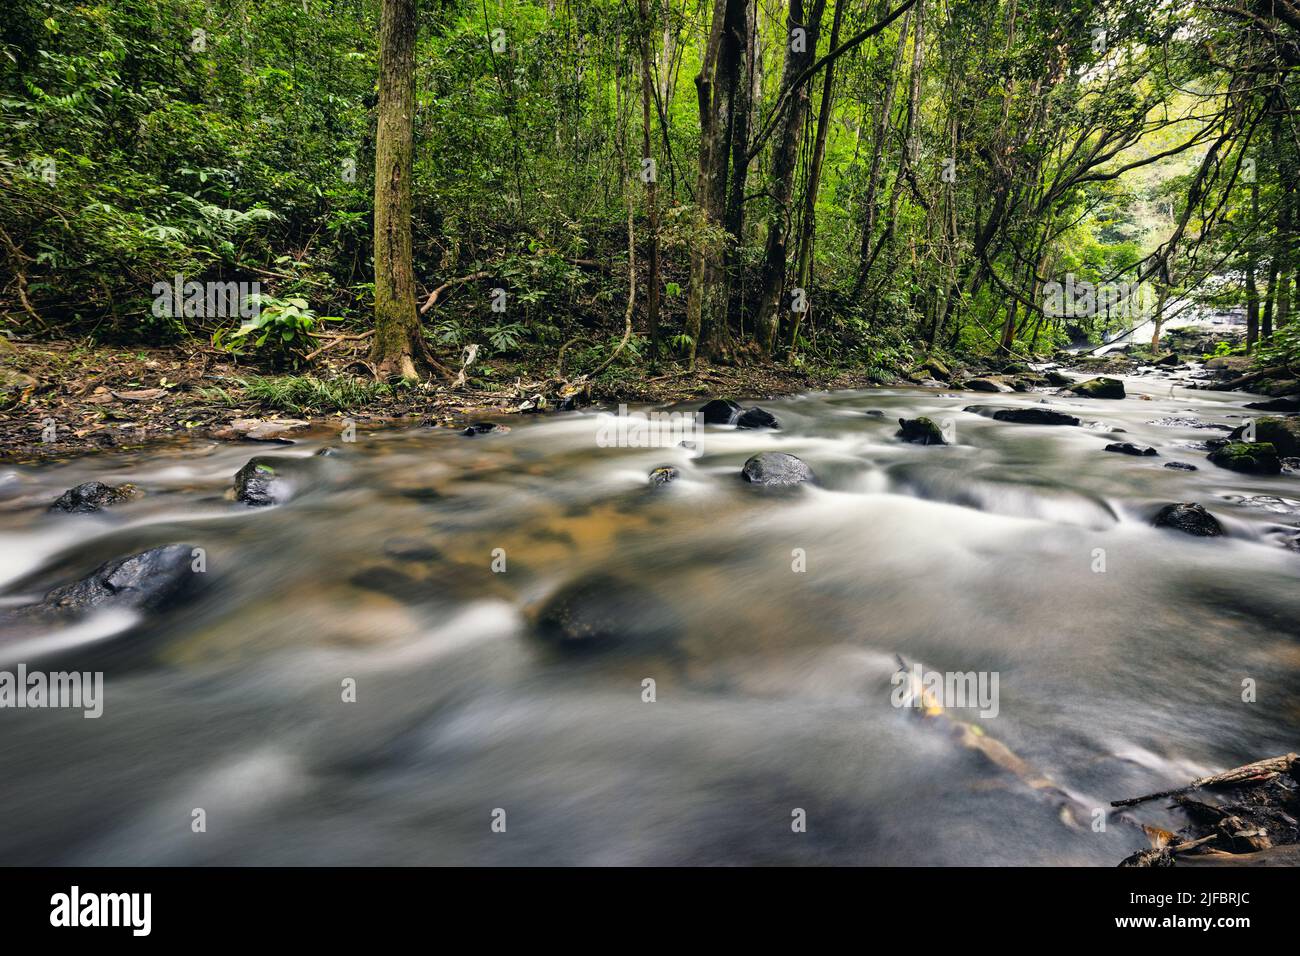 Long exposure shot of a tropical river in the Doi Inthanon national park, Thailand Stock Photo